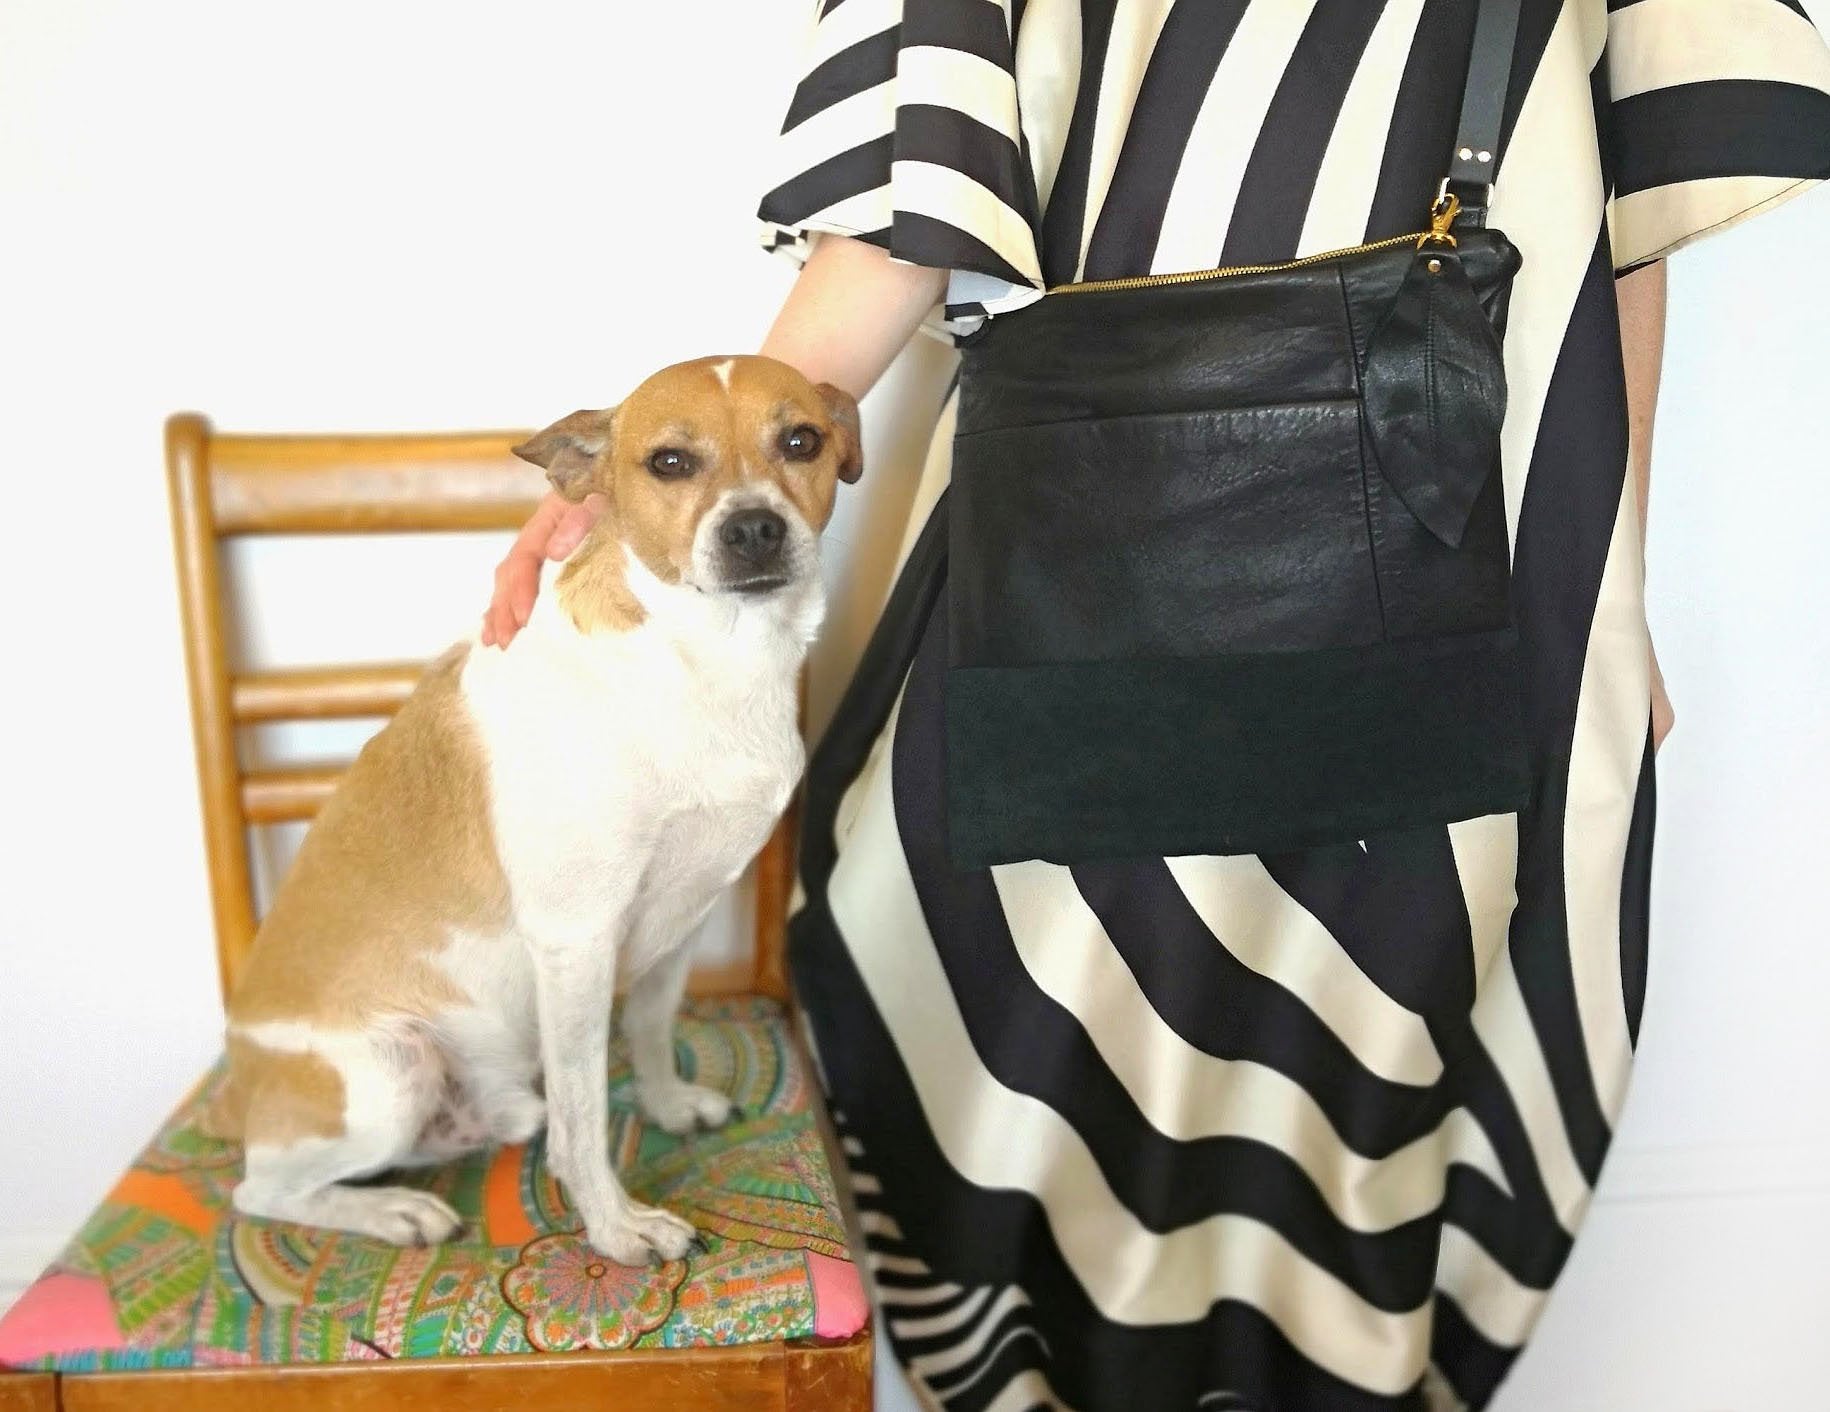 Woman in striped dress and Fringe Vintage recycled black leather bag stands next to her dog